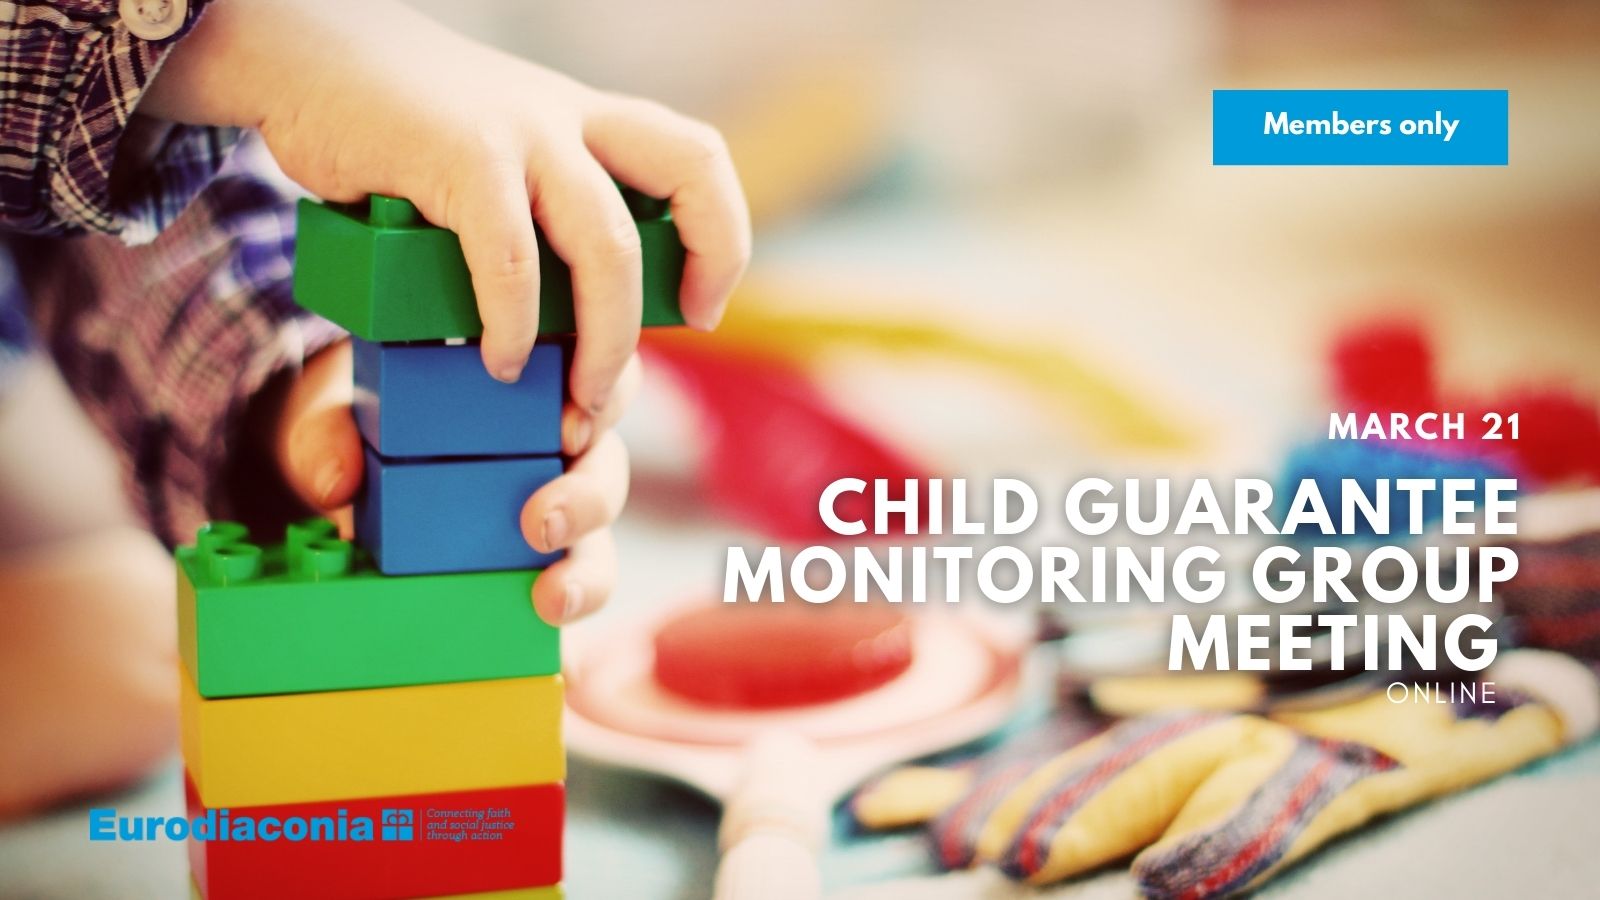 Child Guarantee Monitoring Group Meeting | Members only Online event